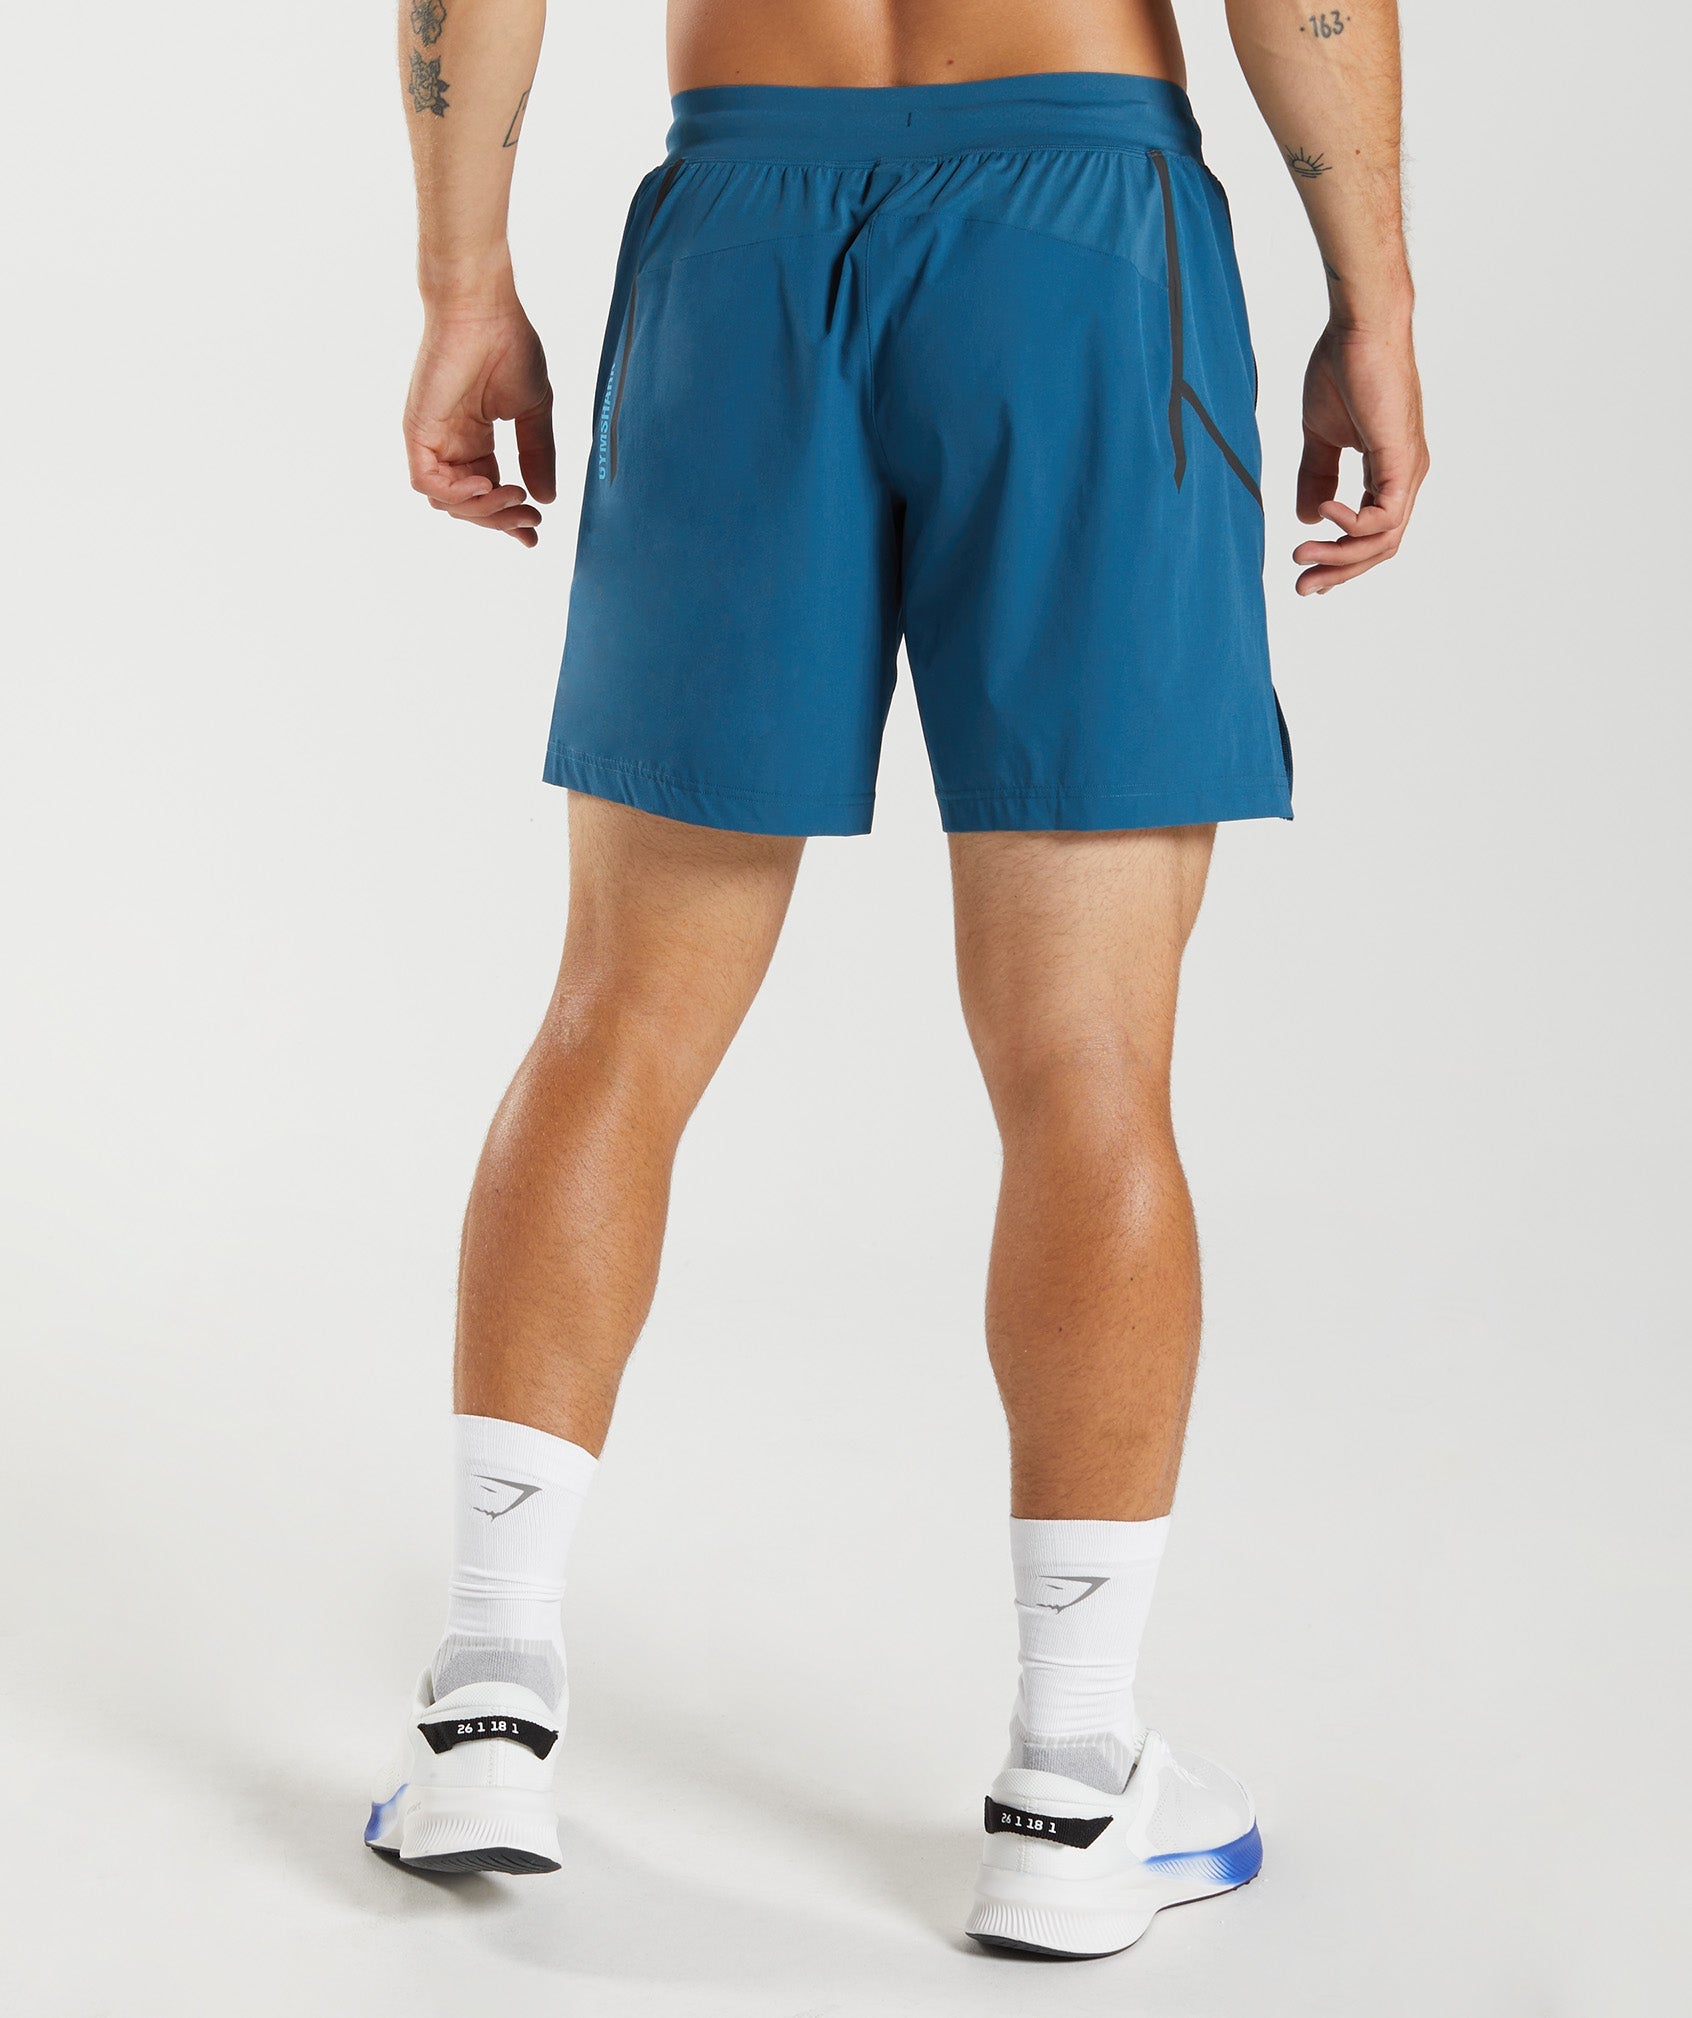 Apex 8" Function Shorts in Atlantic Blue - view 2